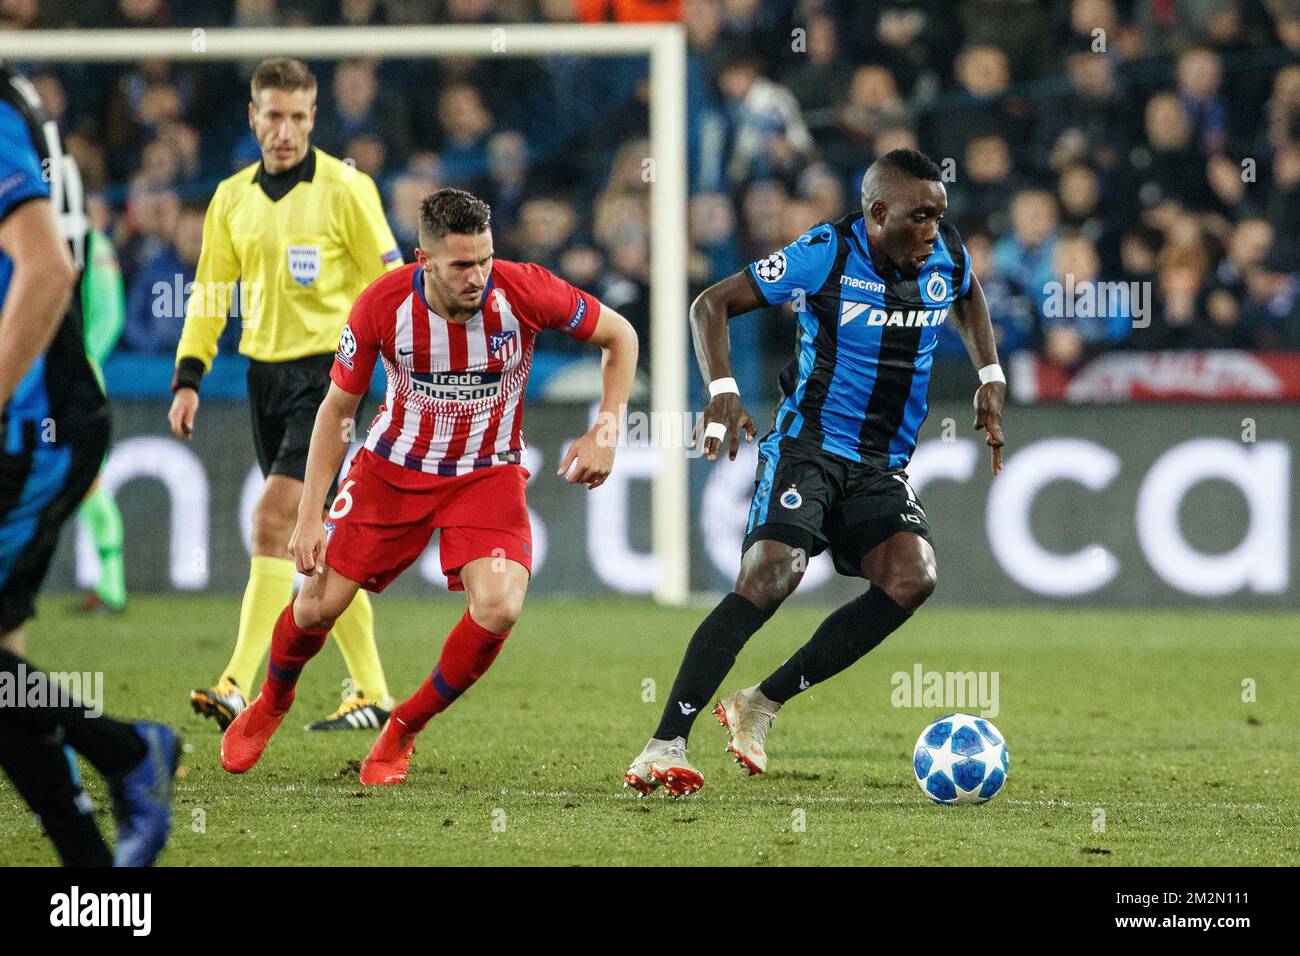 Atletico's 'Koke' Jorge Resurreccion Merodio and Club's Marvelous Nakamba fight for the ball during a game between Belgian soccer team Club Brugge KV and Spanish club Athletico Madrid, in Brugge, Tuesday 11 December 2018, on the sixth and last day of the UEFA Champions League, in the group A. BELGA PHOTO KURT DESPLENTER Stock Photo